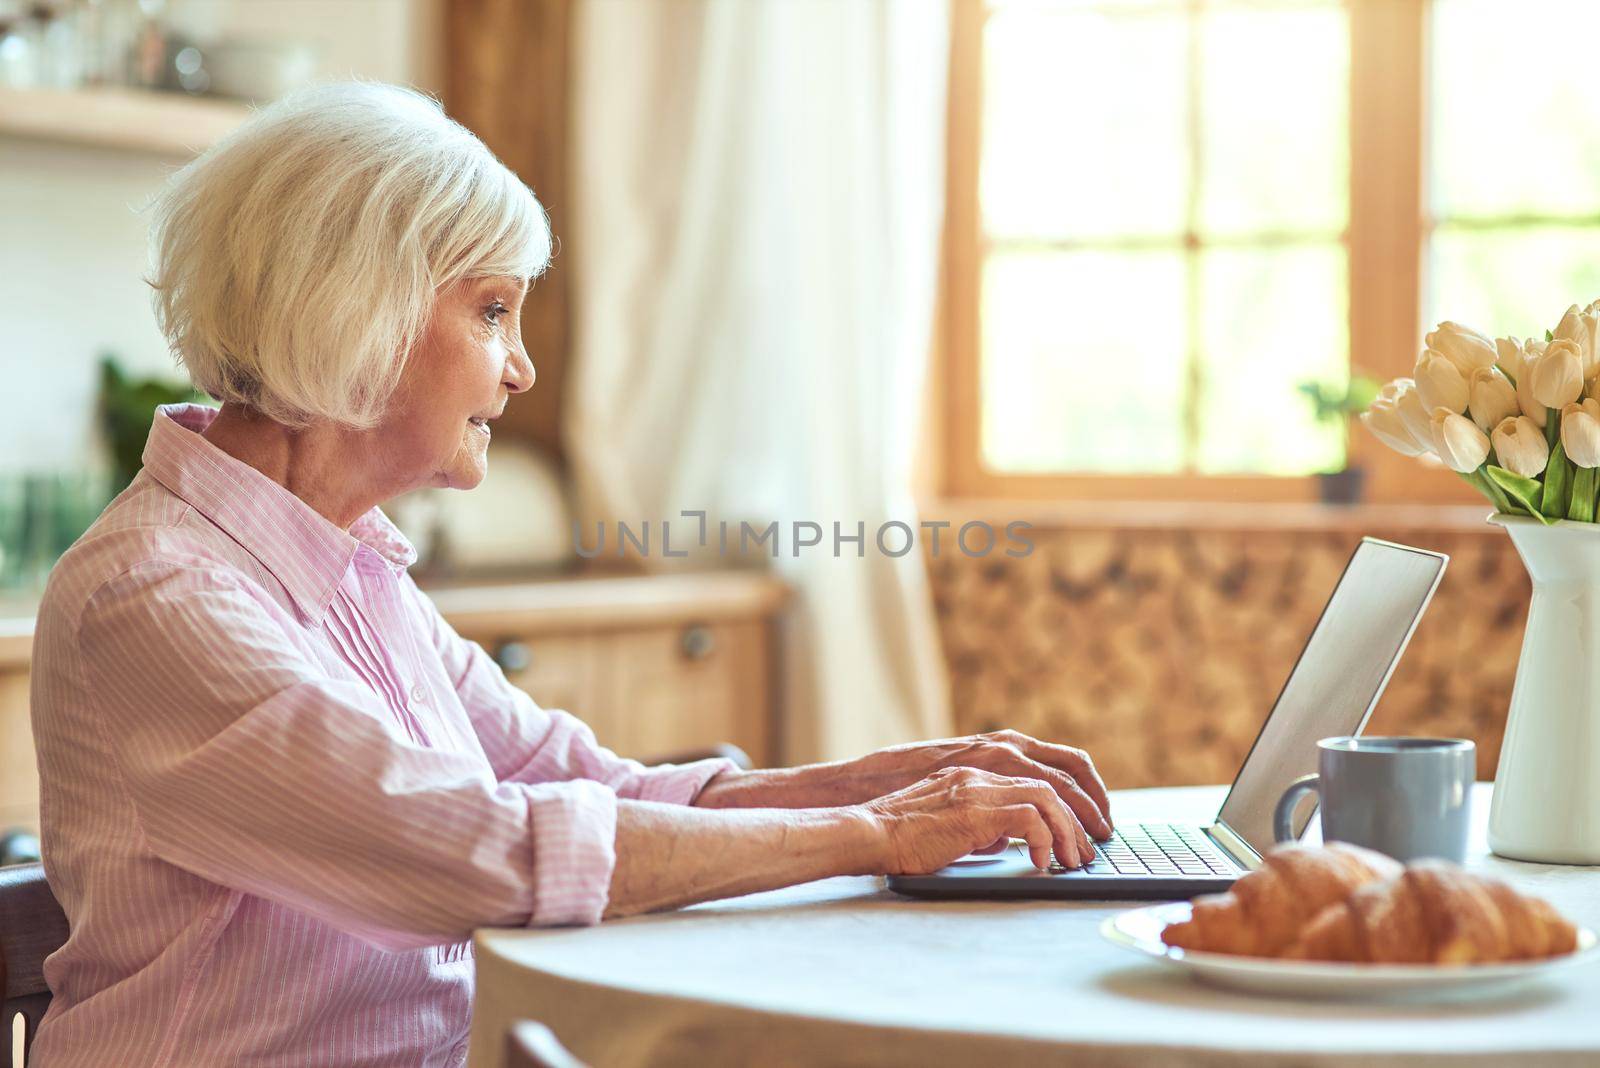 Side view of aged woman working at laptop while drinking tea during morning at home. Domestic lifestyle concept. Copy space